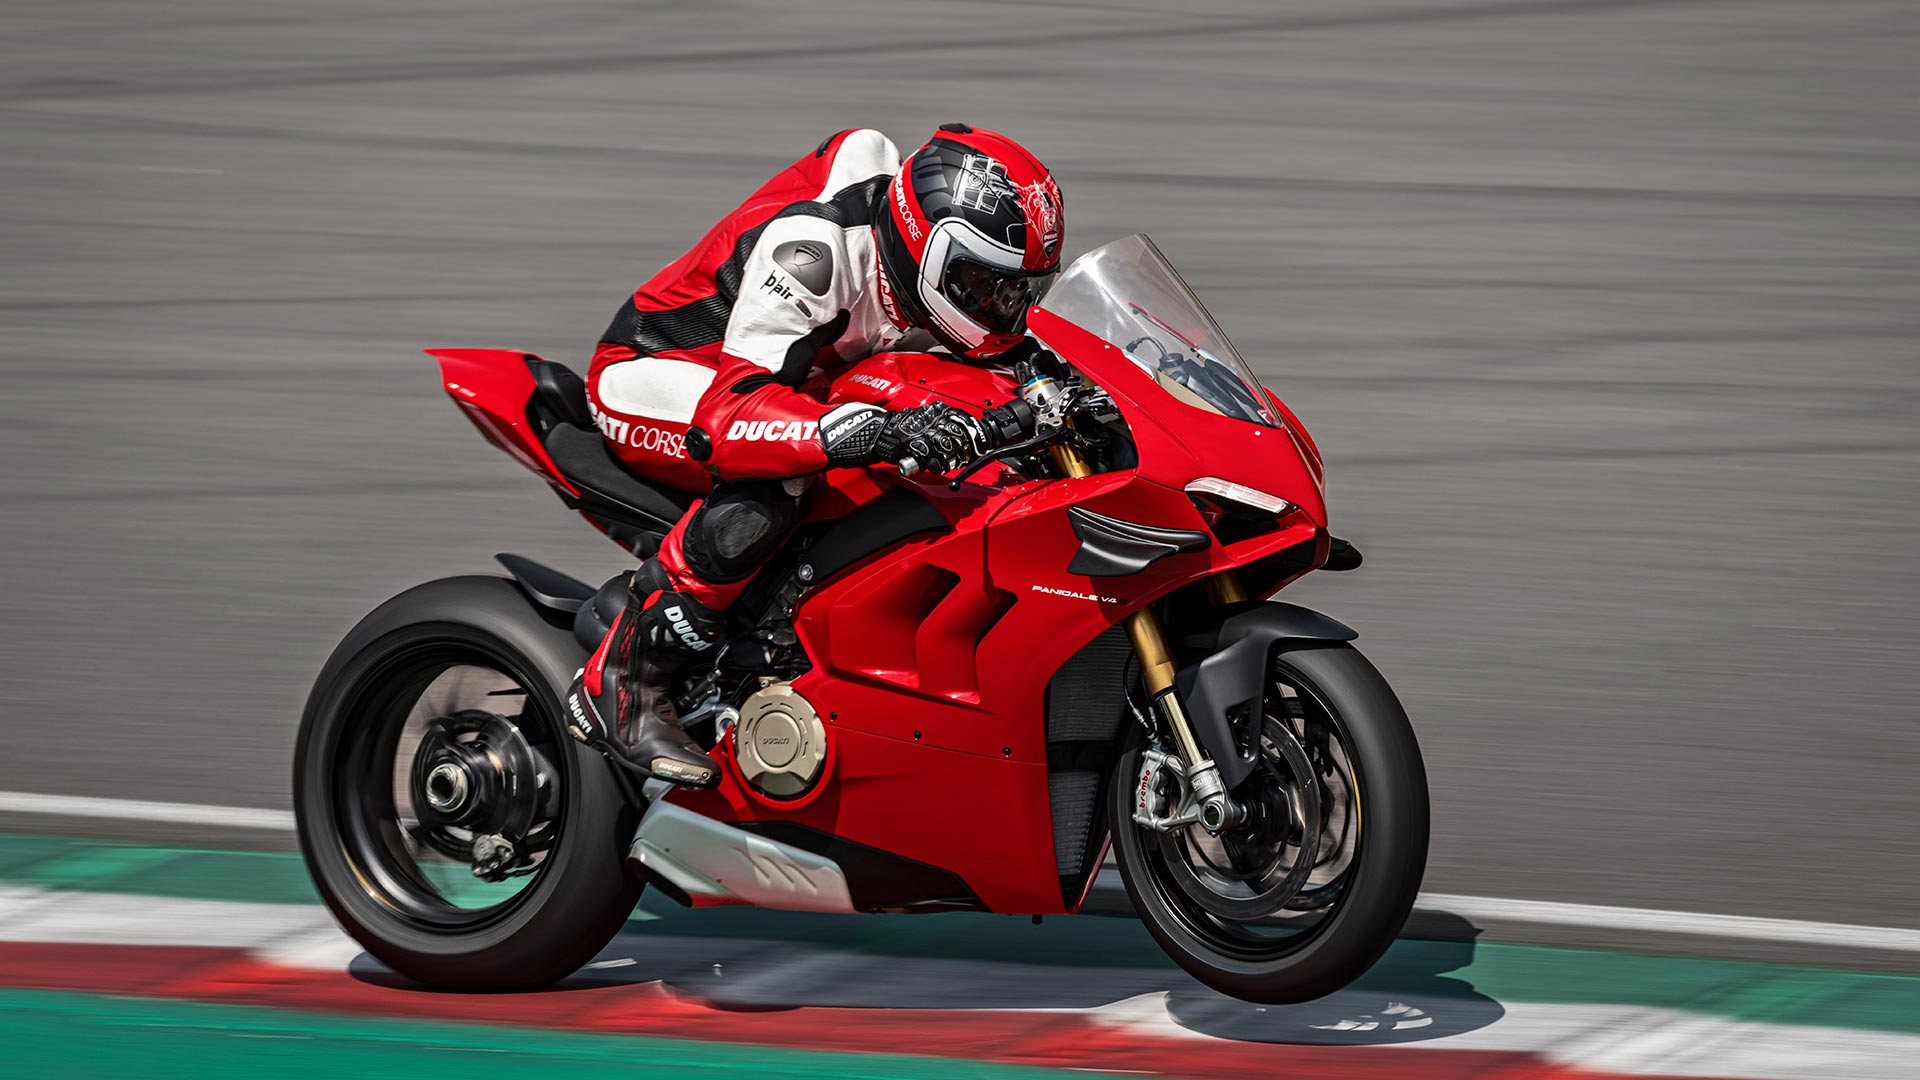 2021 Ducati Panigale V4 R Sports Motorcycle